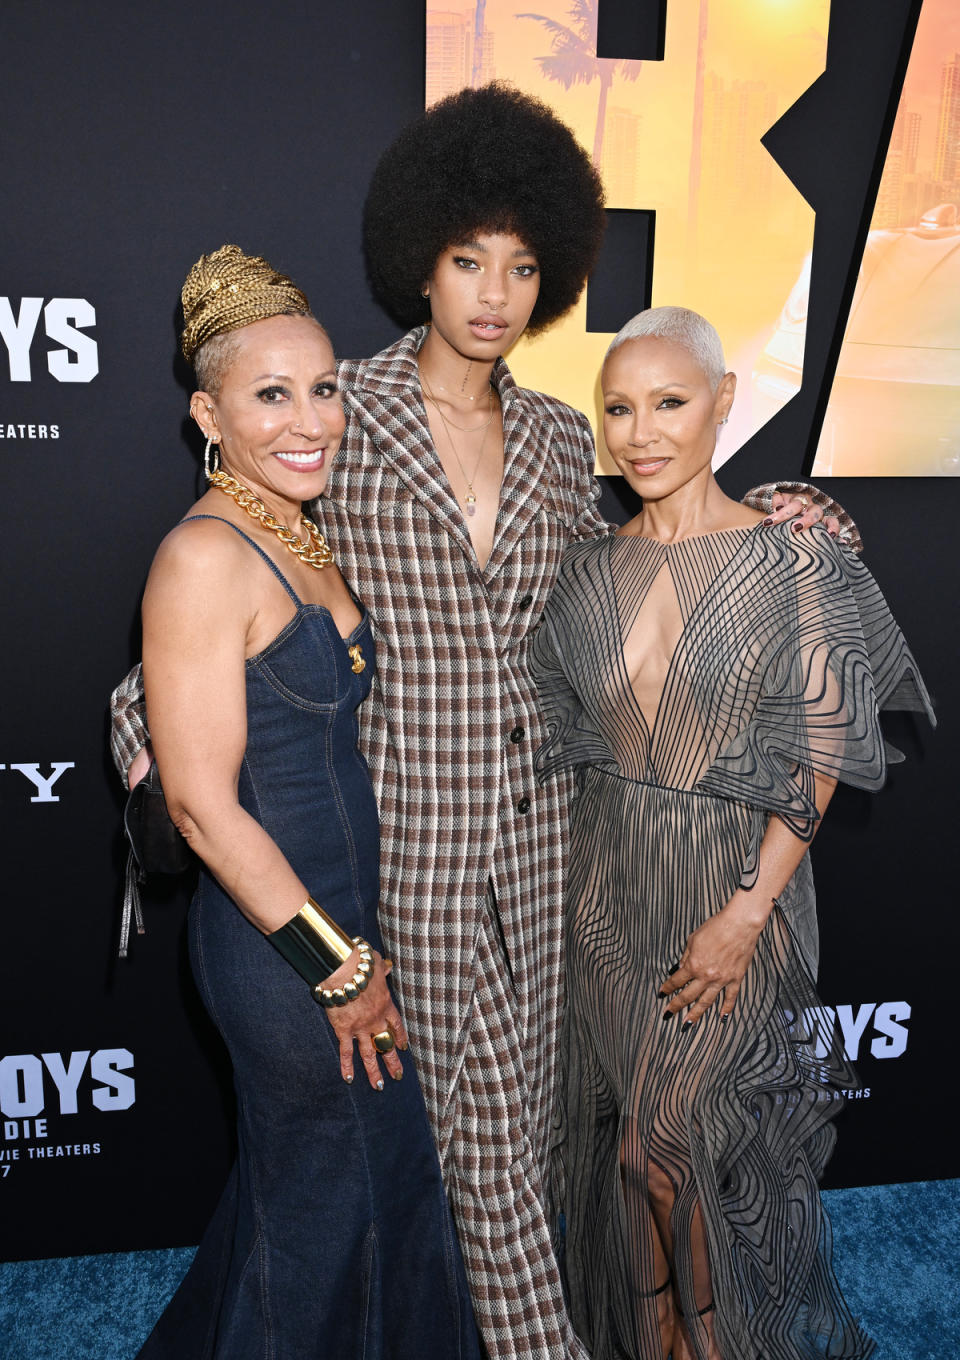 Gammy Norris, Willow Smith and Jada Pinkett Smith at the premiere of "Bad Boys: Ride or Die" at the TCL Chinese Theater on May 30, 2024 in Hollywood, California.